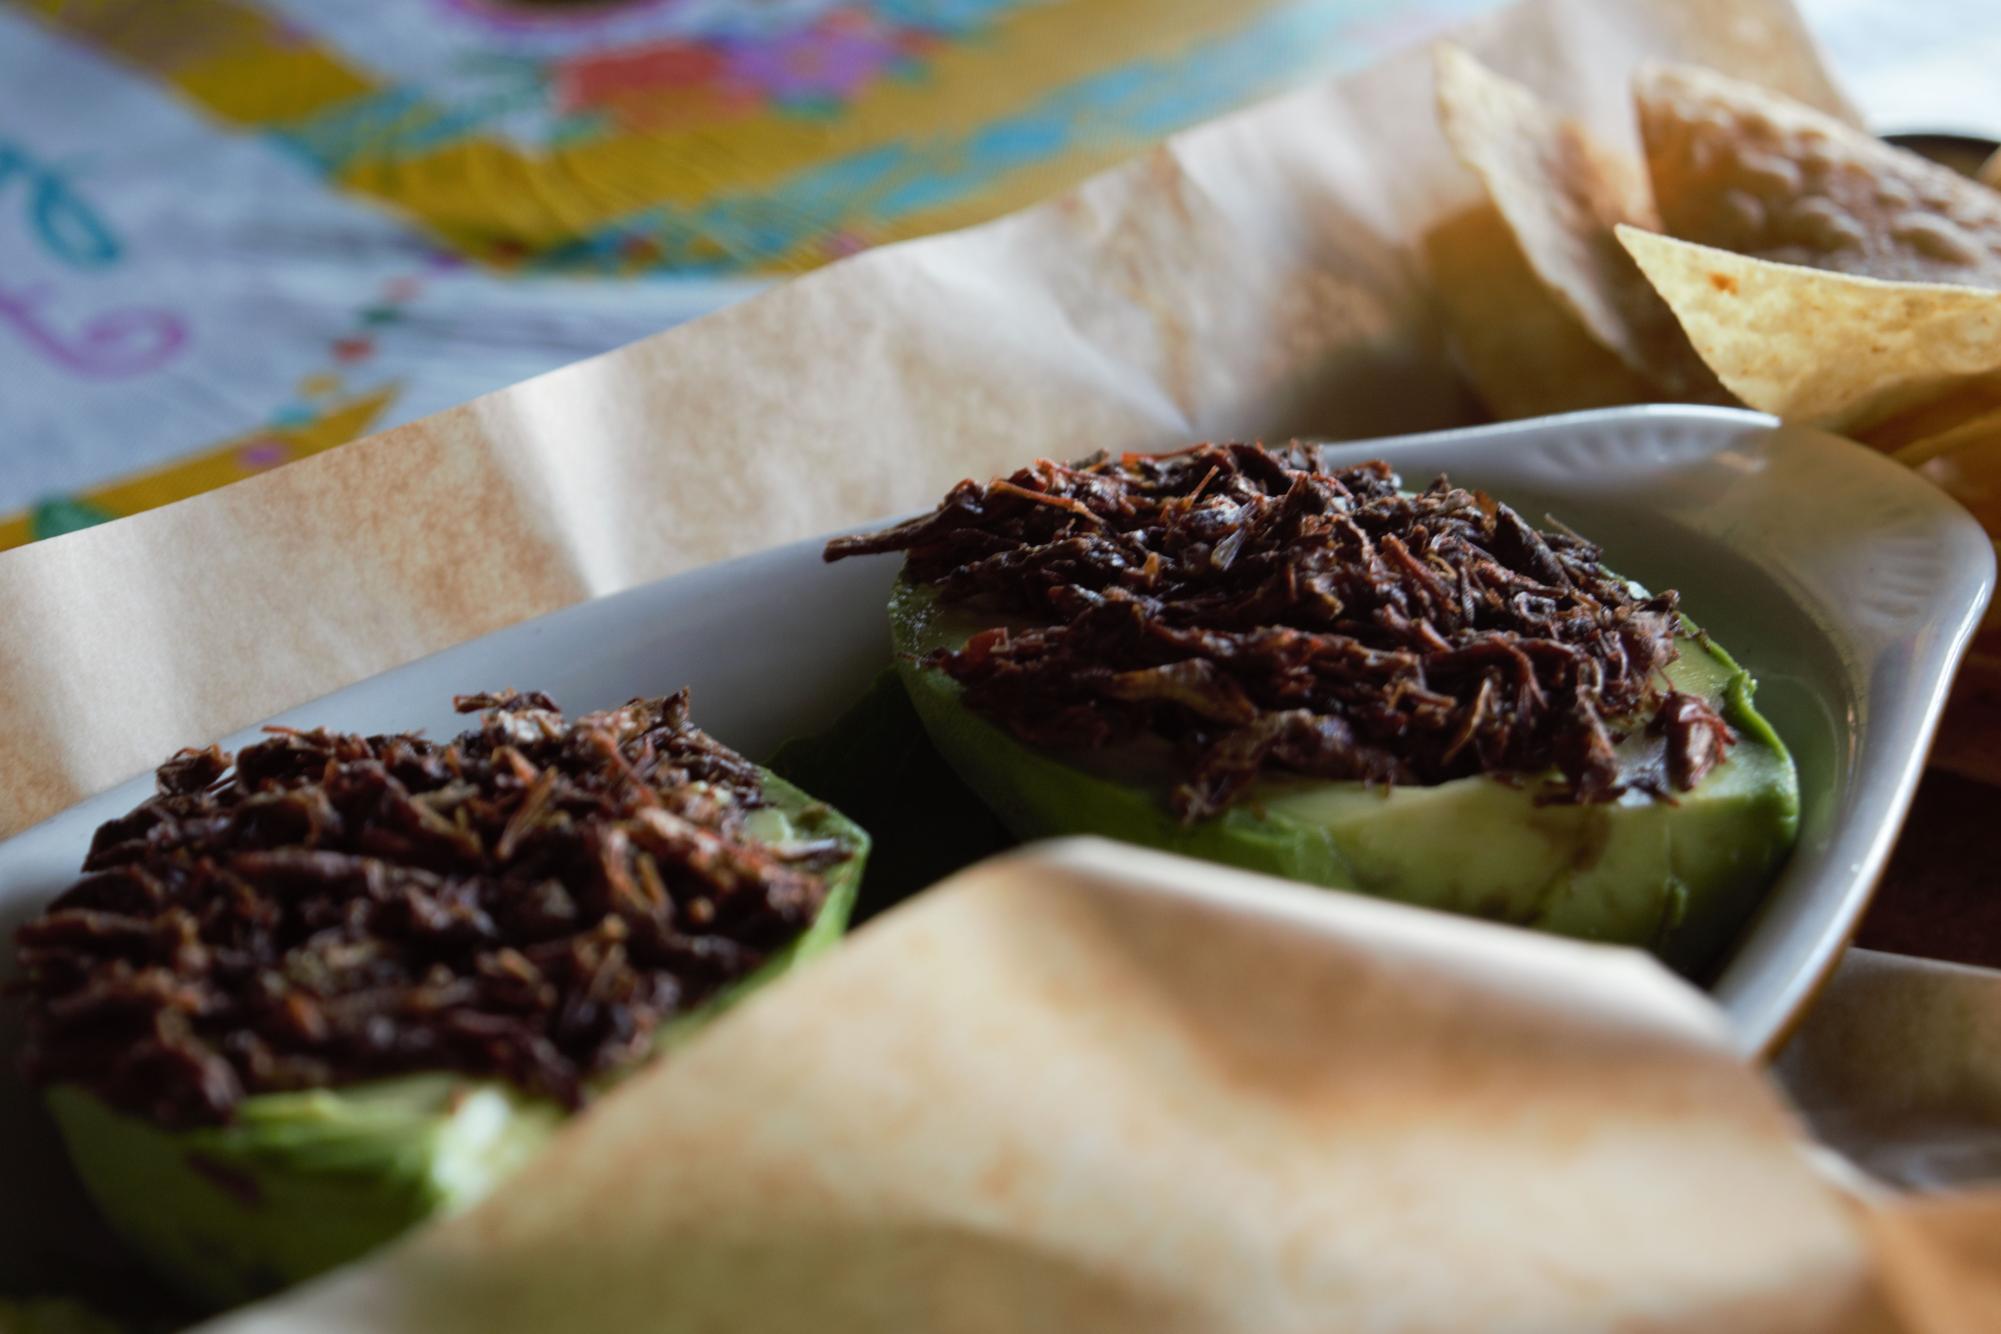 The chapulines champions is served on a fresh avocado. It also comes with a side of corn chips. 